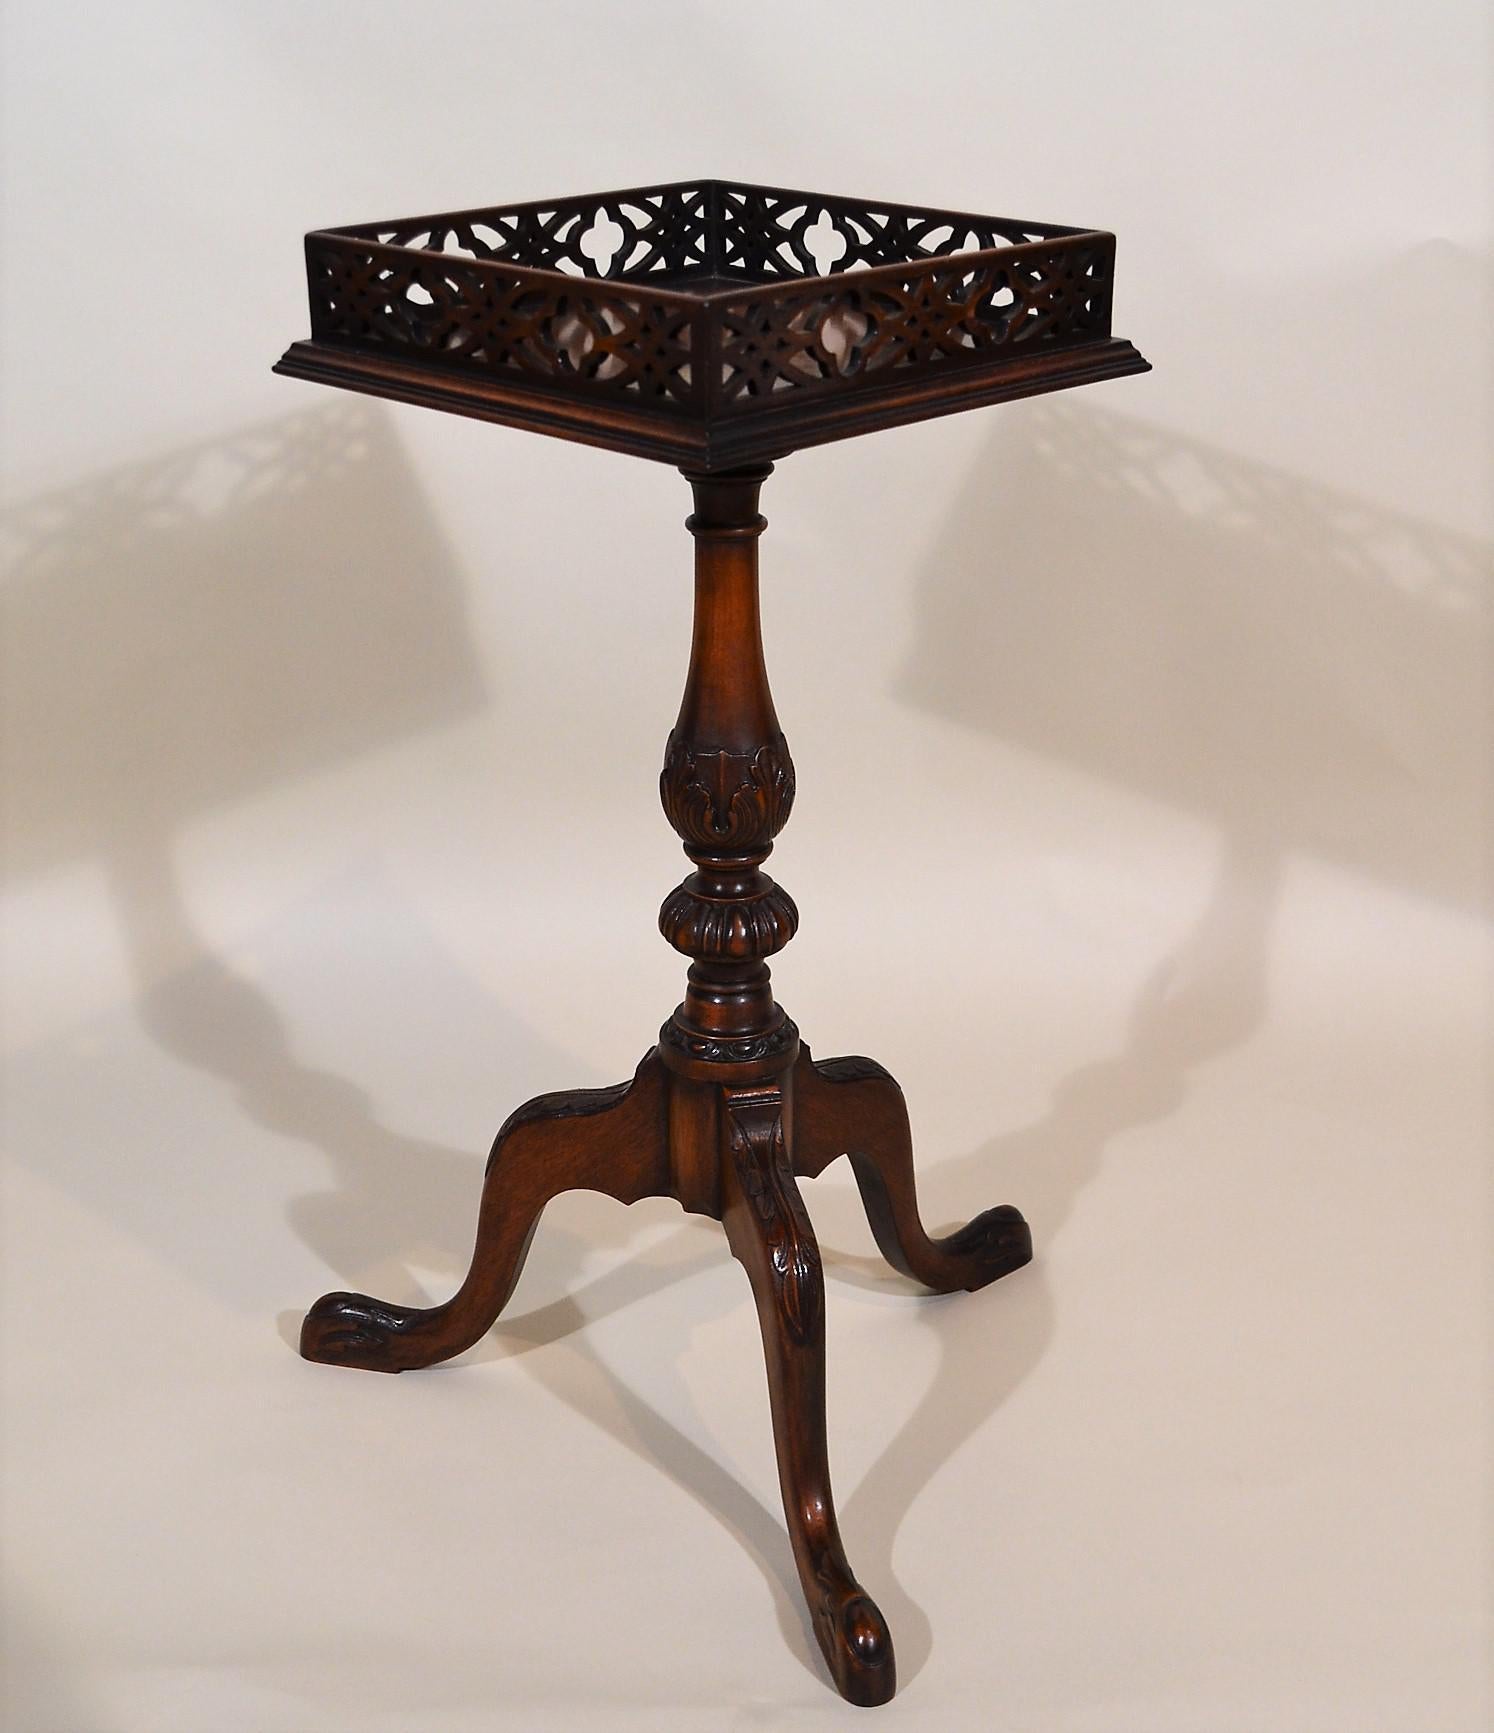 English galleried tripod mahogany side table. This table is made for us in England and is a perfect little occasional piece with handsome lines.